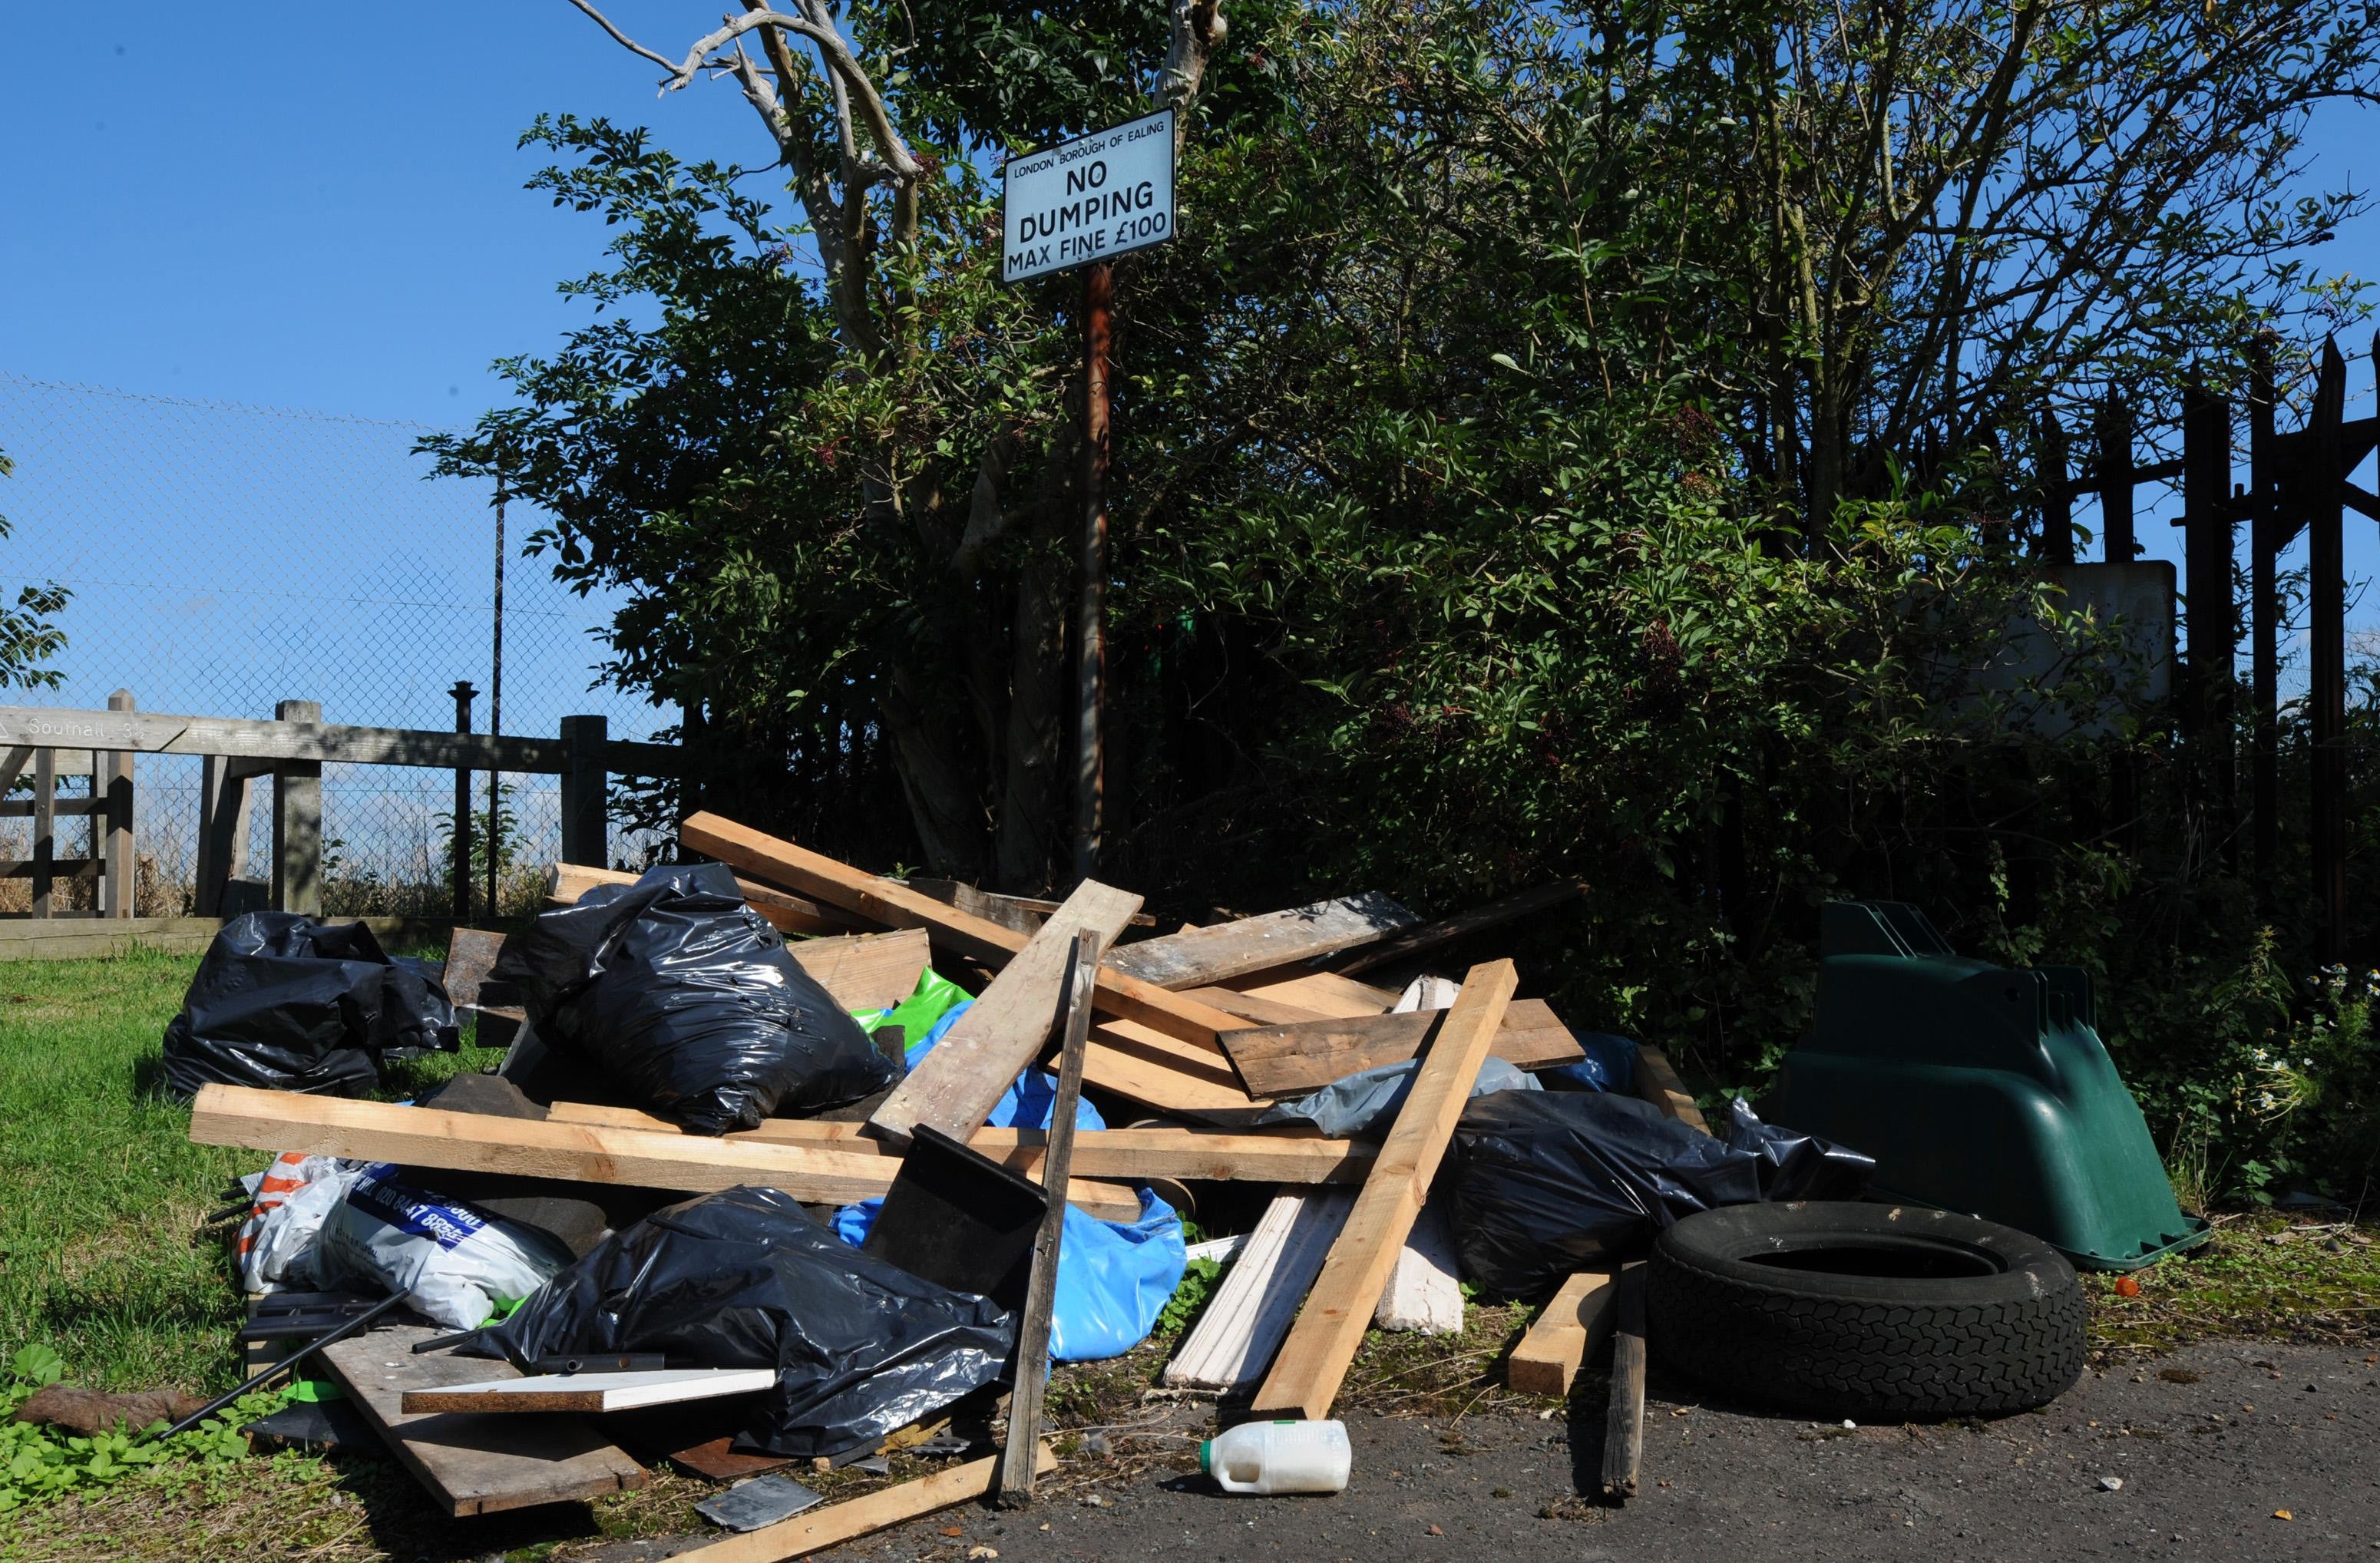 London saw highest amount of fly-tipping during pandemic